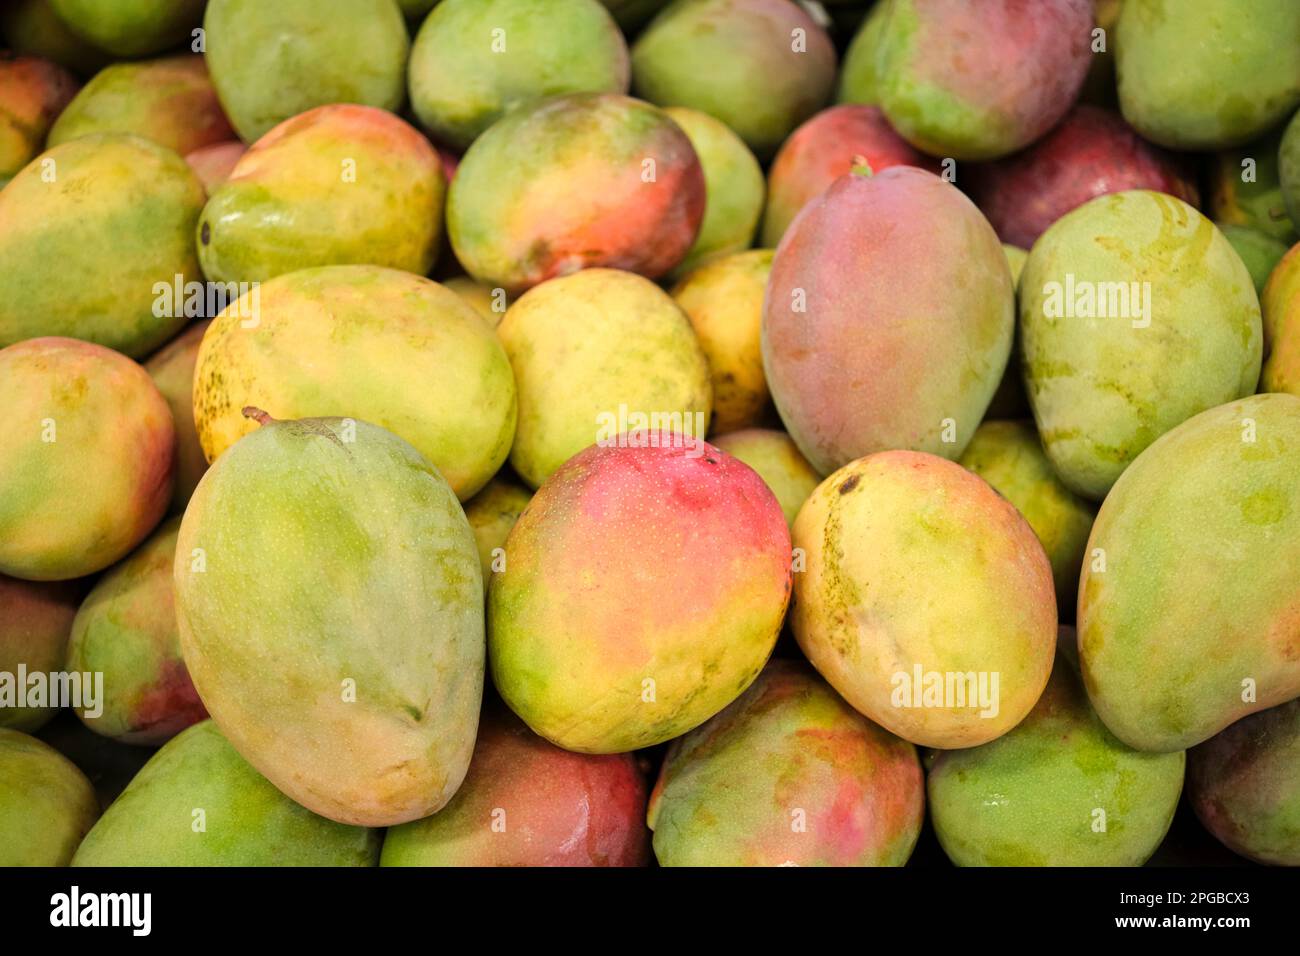 Tropical fruit background, ripe and unripe mangoes filling the frame. Stock Photo